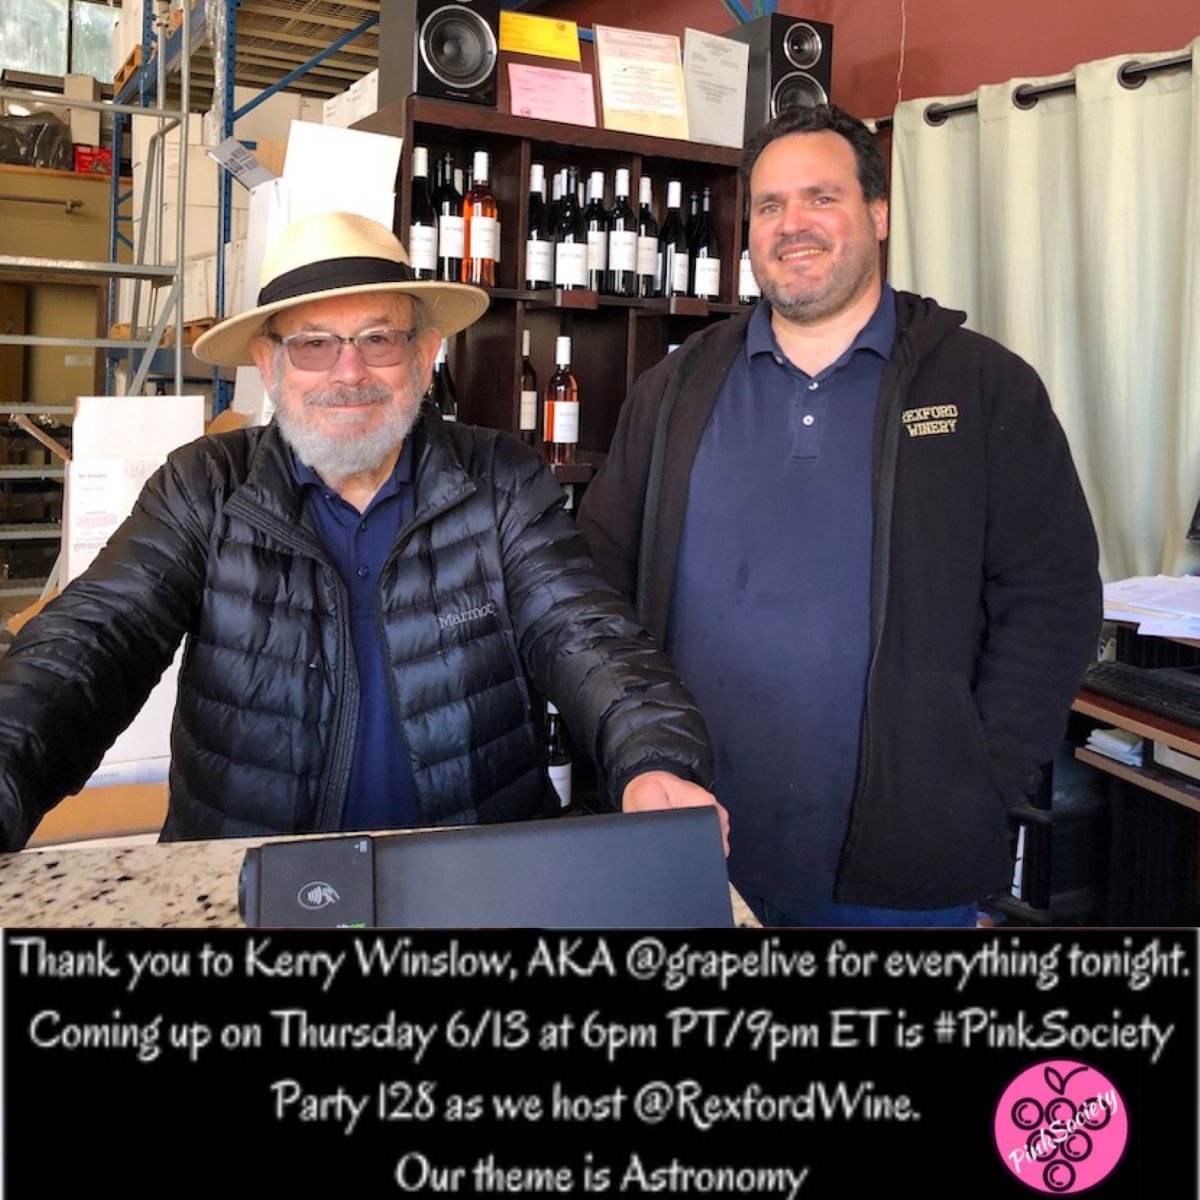 Thank you to Kerry Winslow, AKA @grapelive for everything tonight. Coming up on Thursday 6/13 at 6pm PT/9pm ET is #PinkSociety Party 128 as we host @RexfordWine. Our theme is Astronomy. @_drazzari @jflorez @boozychef @redwinecats @myvinespot @Kerryloves2trvl @rr_pirate @AskRobY